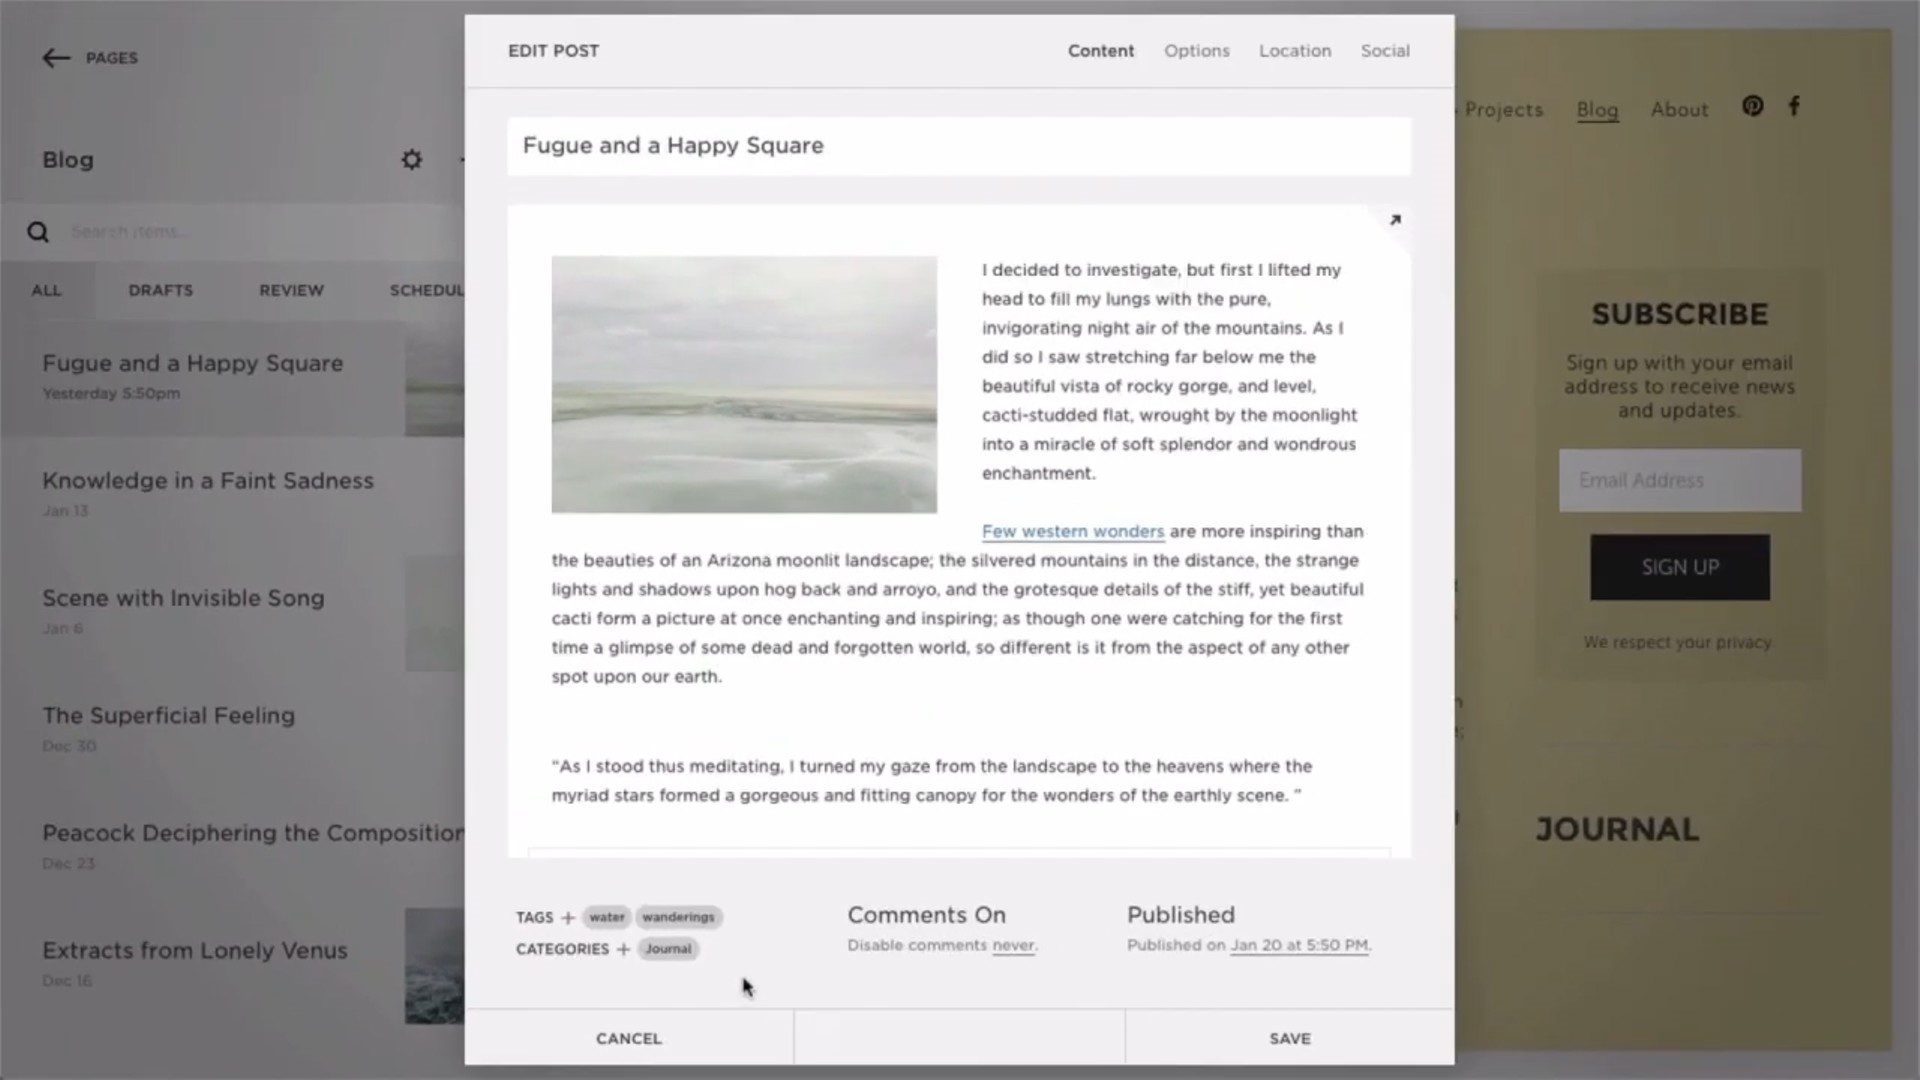 Squarespace Blog Editor with Tags, Categories, and Comments